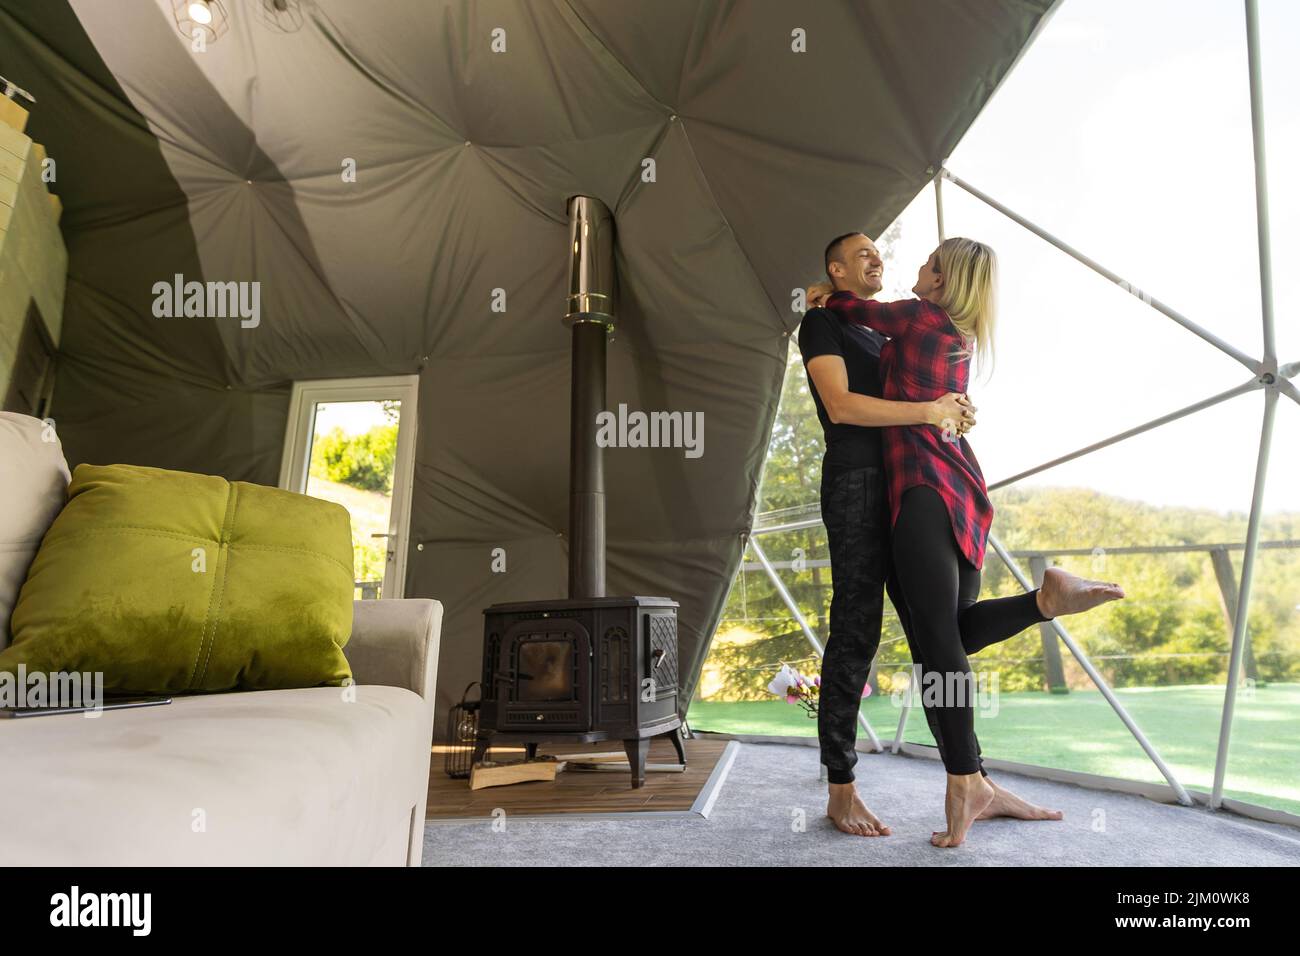 A Couple In Geo Dome Tents Cozy Camping Glamping Holiday Vacation